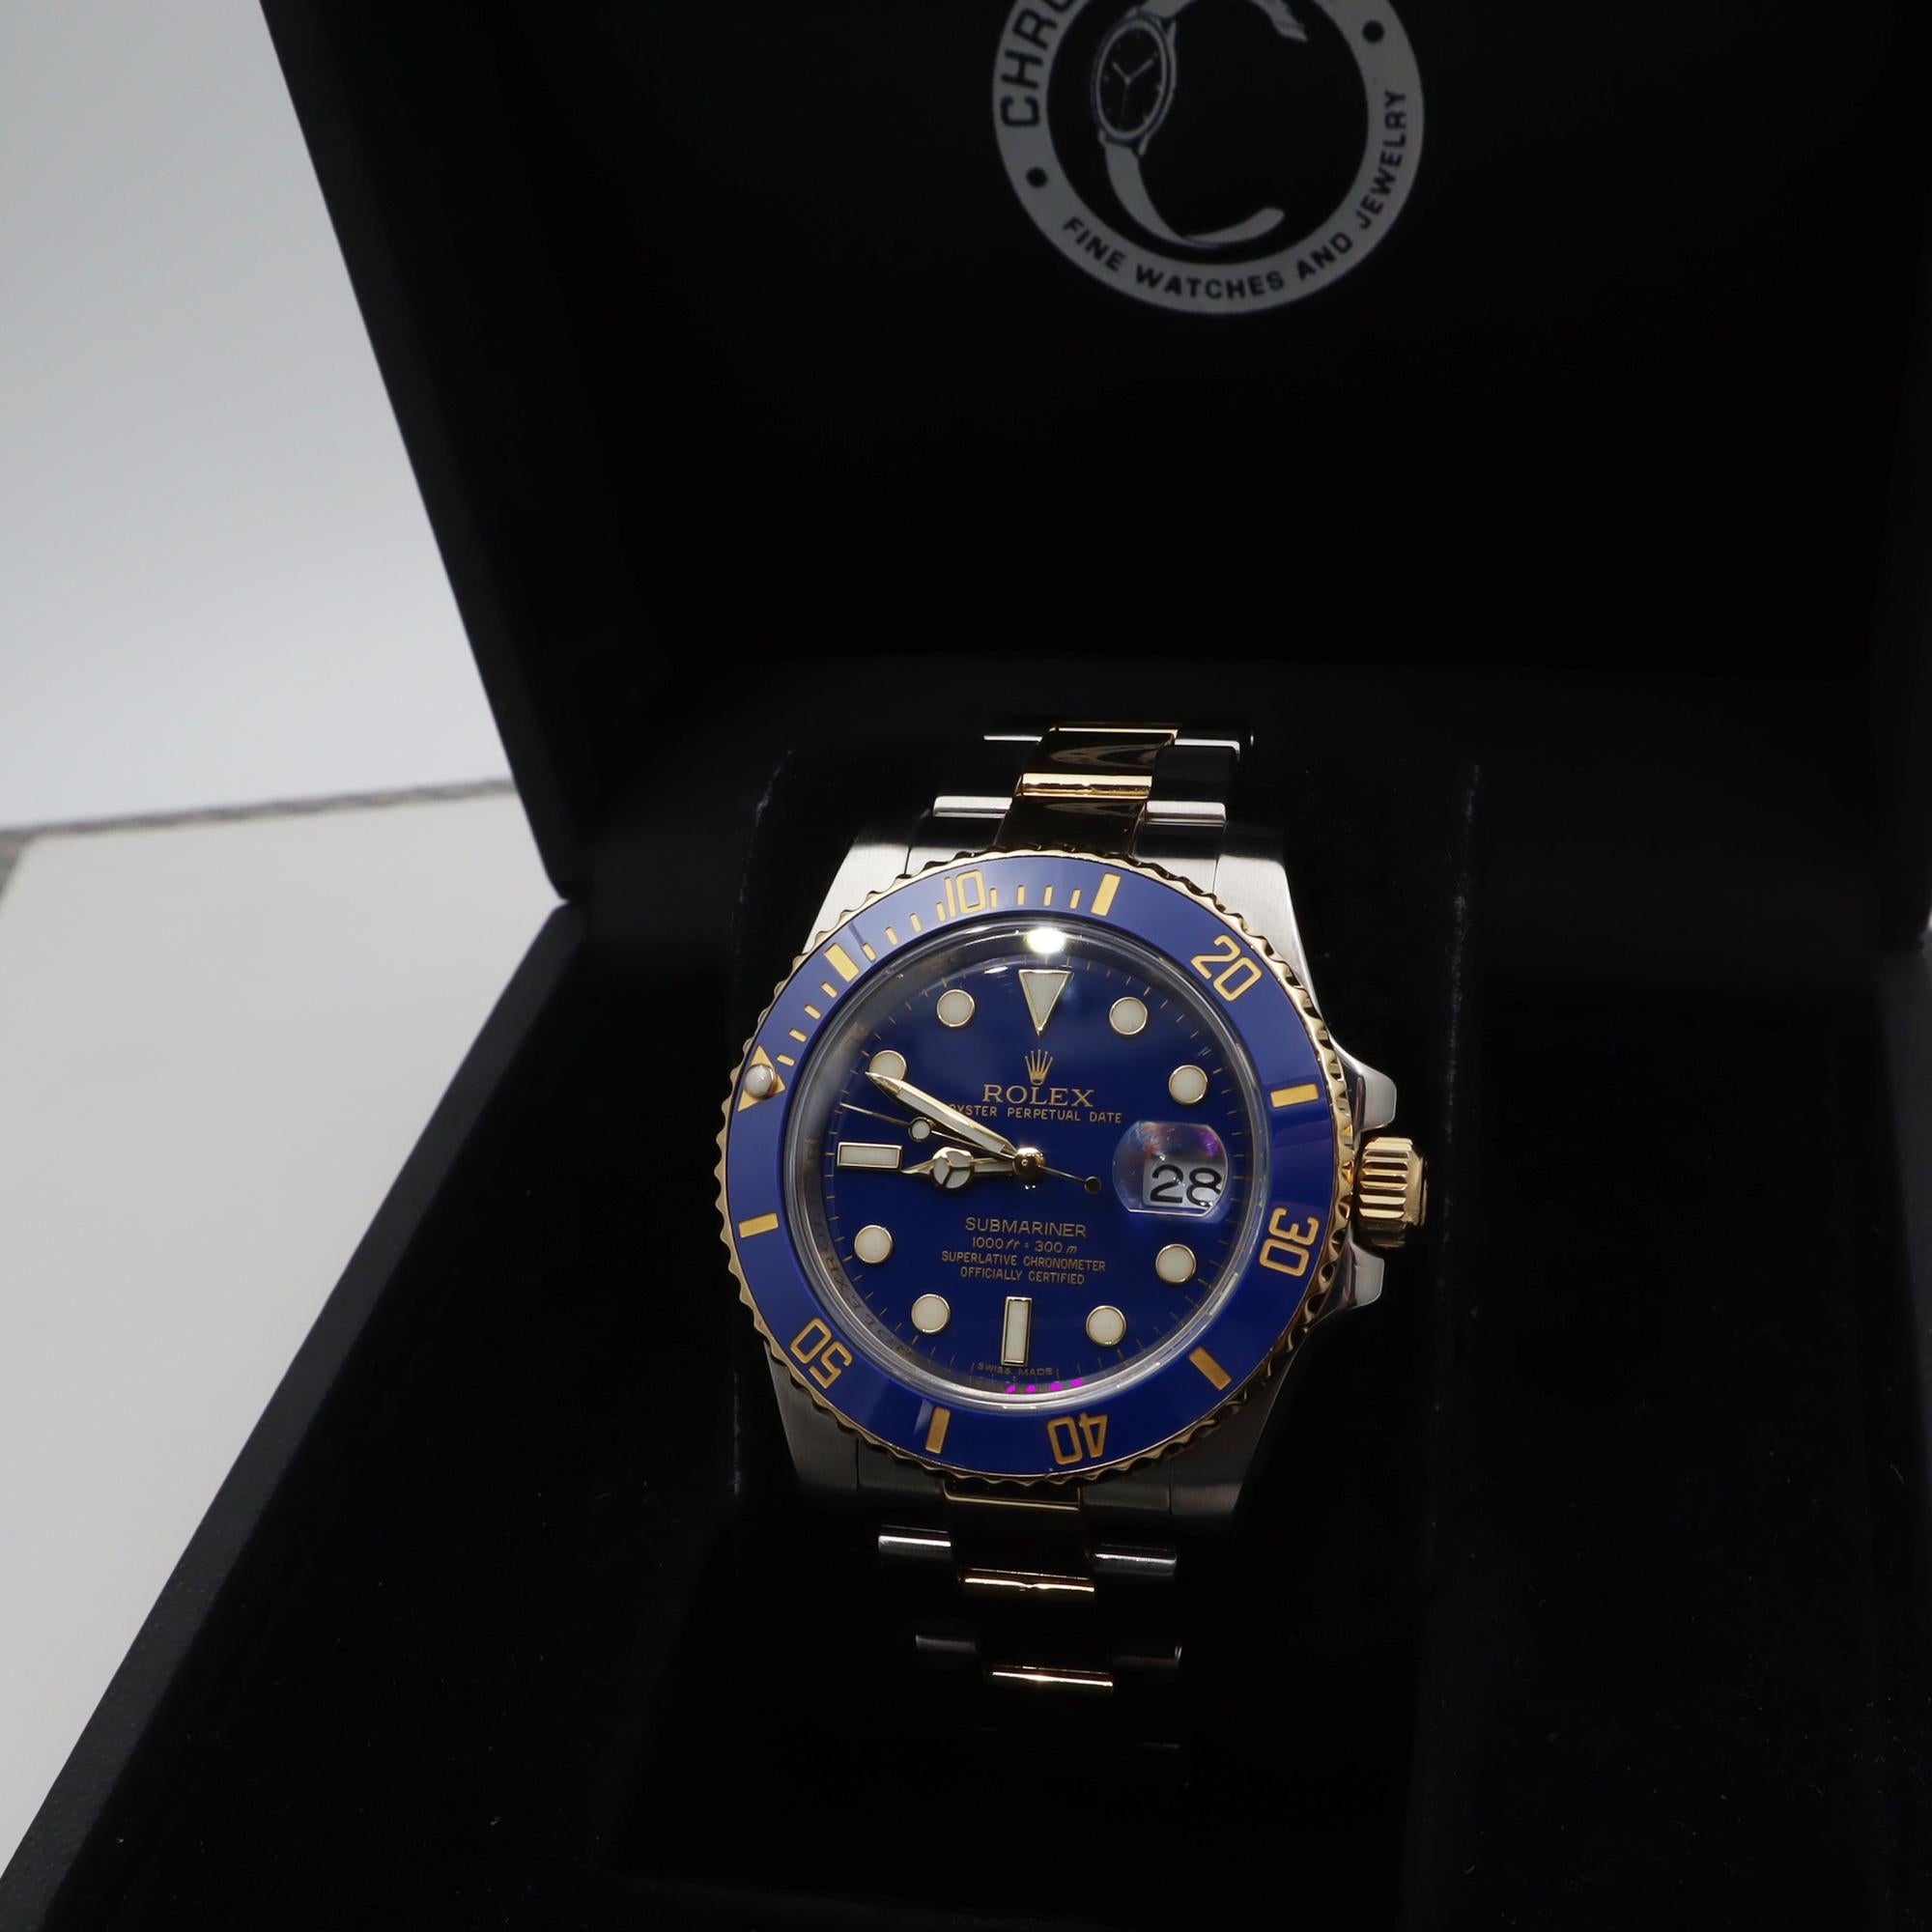 Rolex Submariner 18K Gold Steel Ceramic Blue Dial Automatic Watch 116613LB For Sale 1